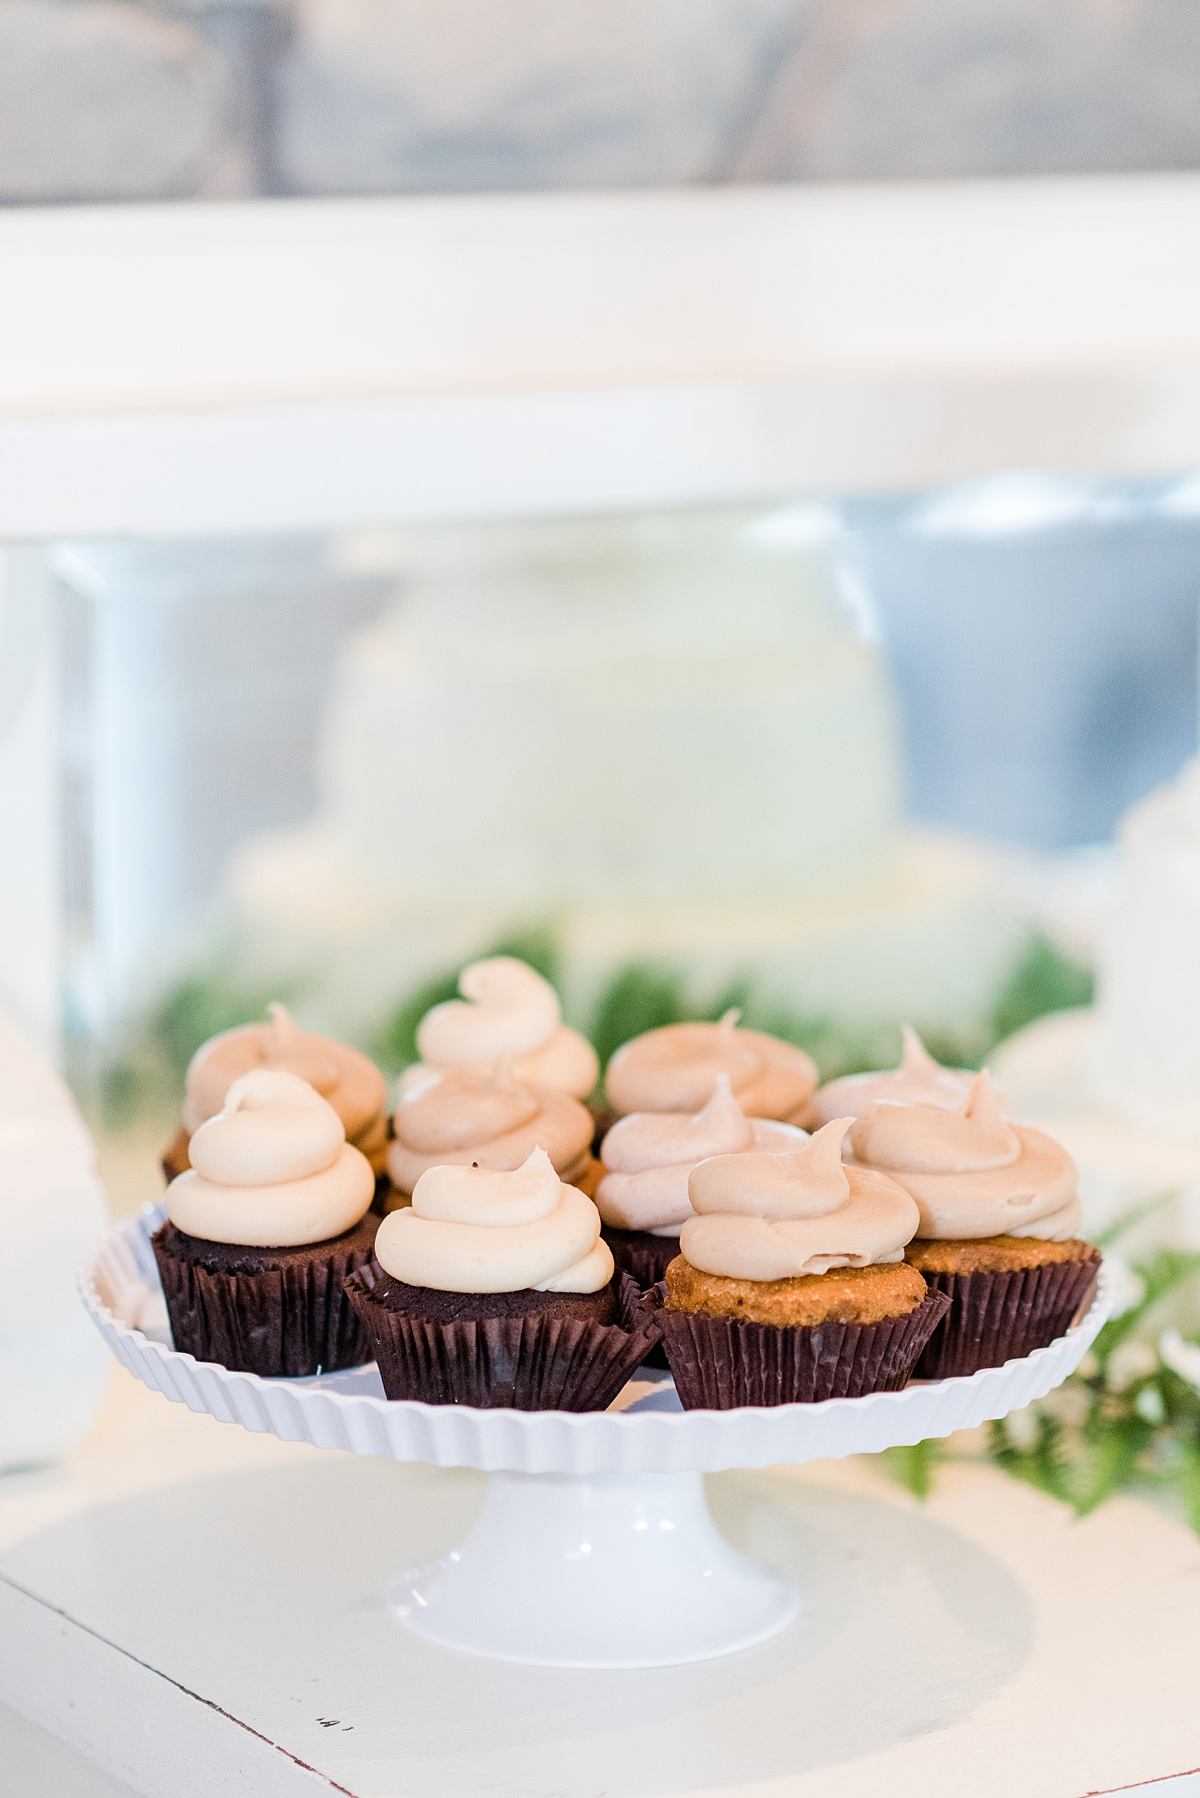 Cupcakes at Cake Table During Granary at Valley Pike Rustic Wedding Reception. Wedding Photography by Virginia Wedding Photographer Kailey Brianne Photography. 